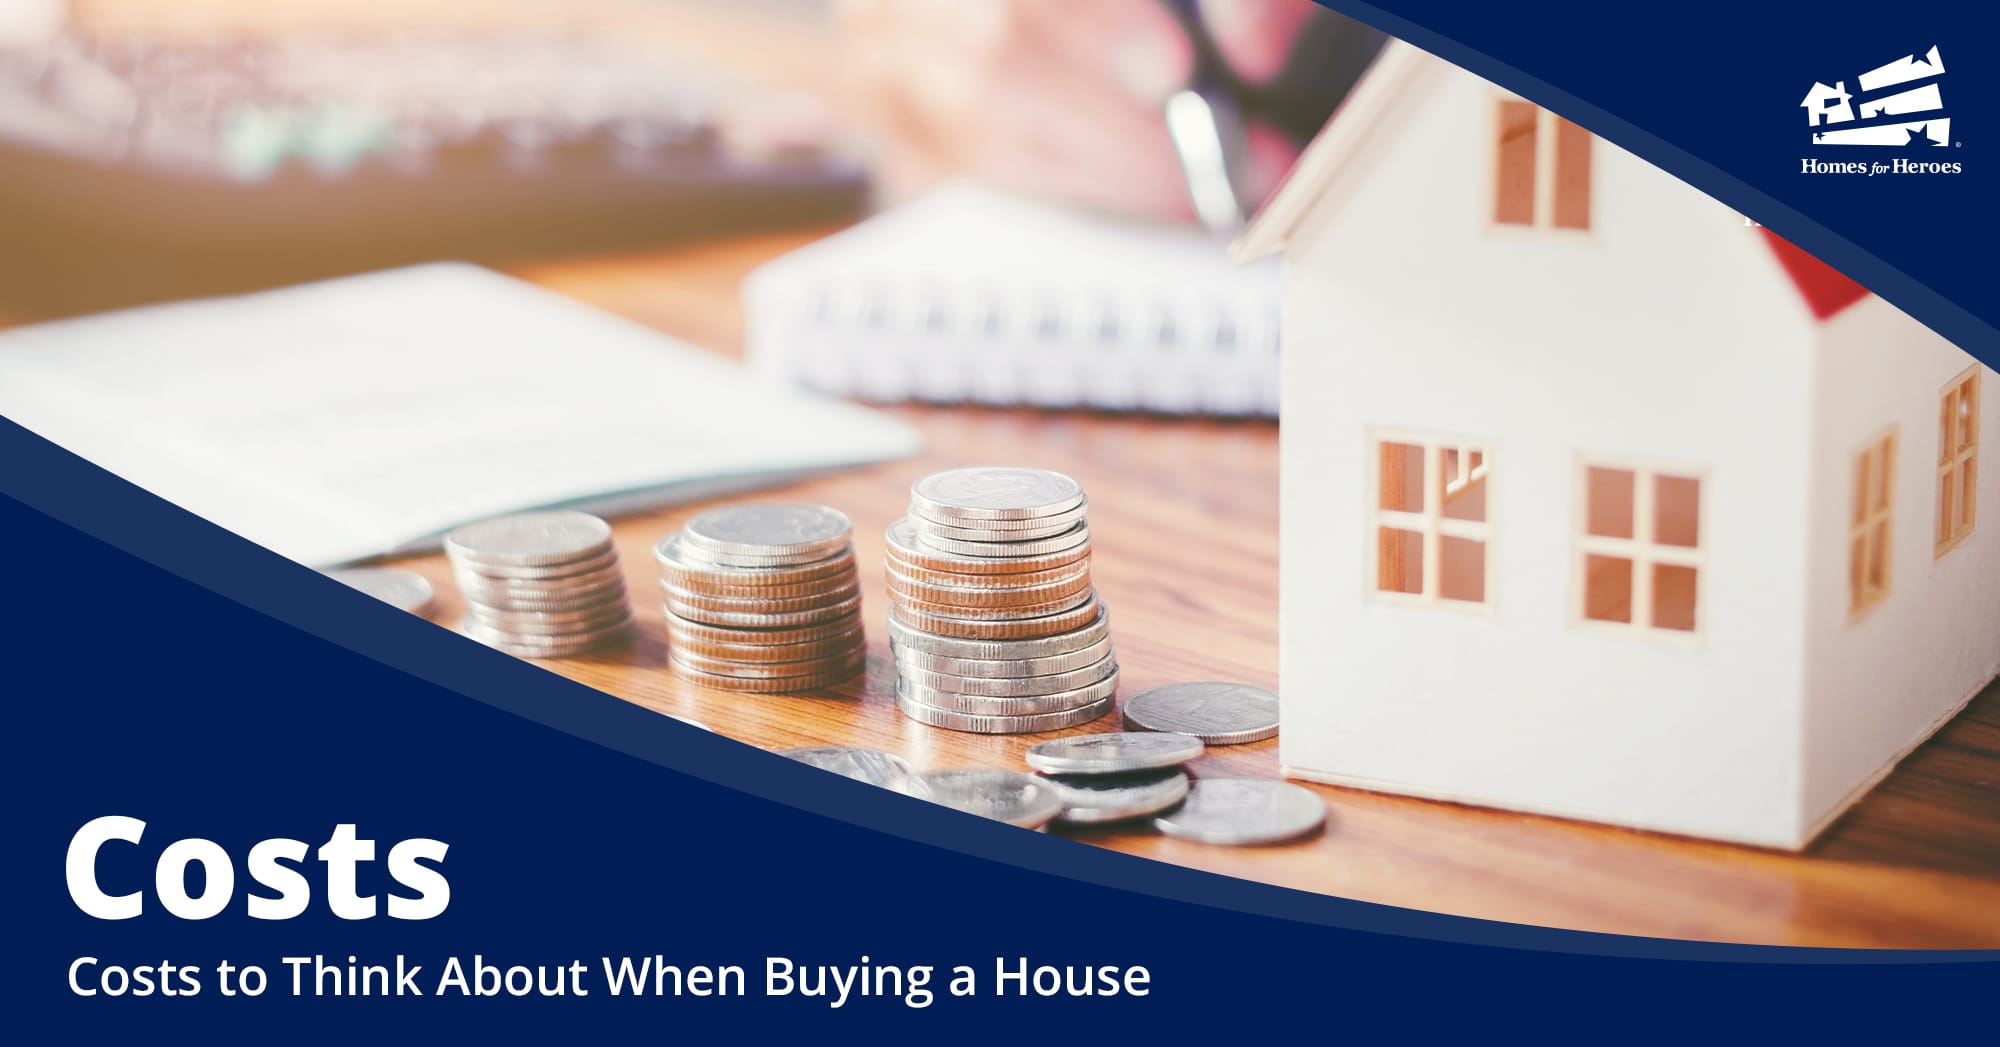 A paper house sits on a desk next to piles of stacked coins and paperwork. The blog title Costs to Think About When Buying a House is in the lower left corner.